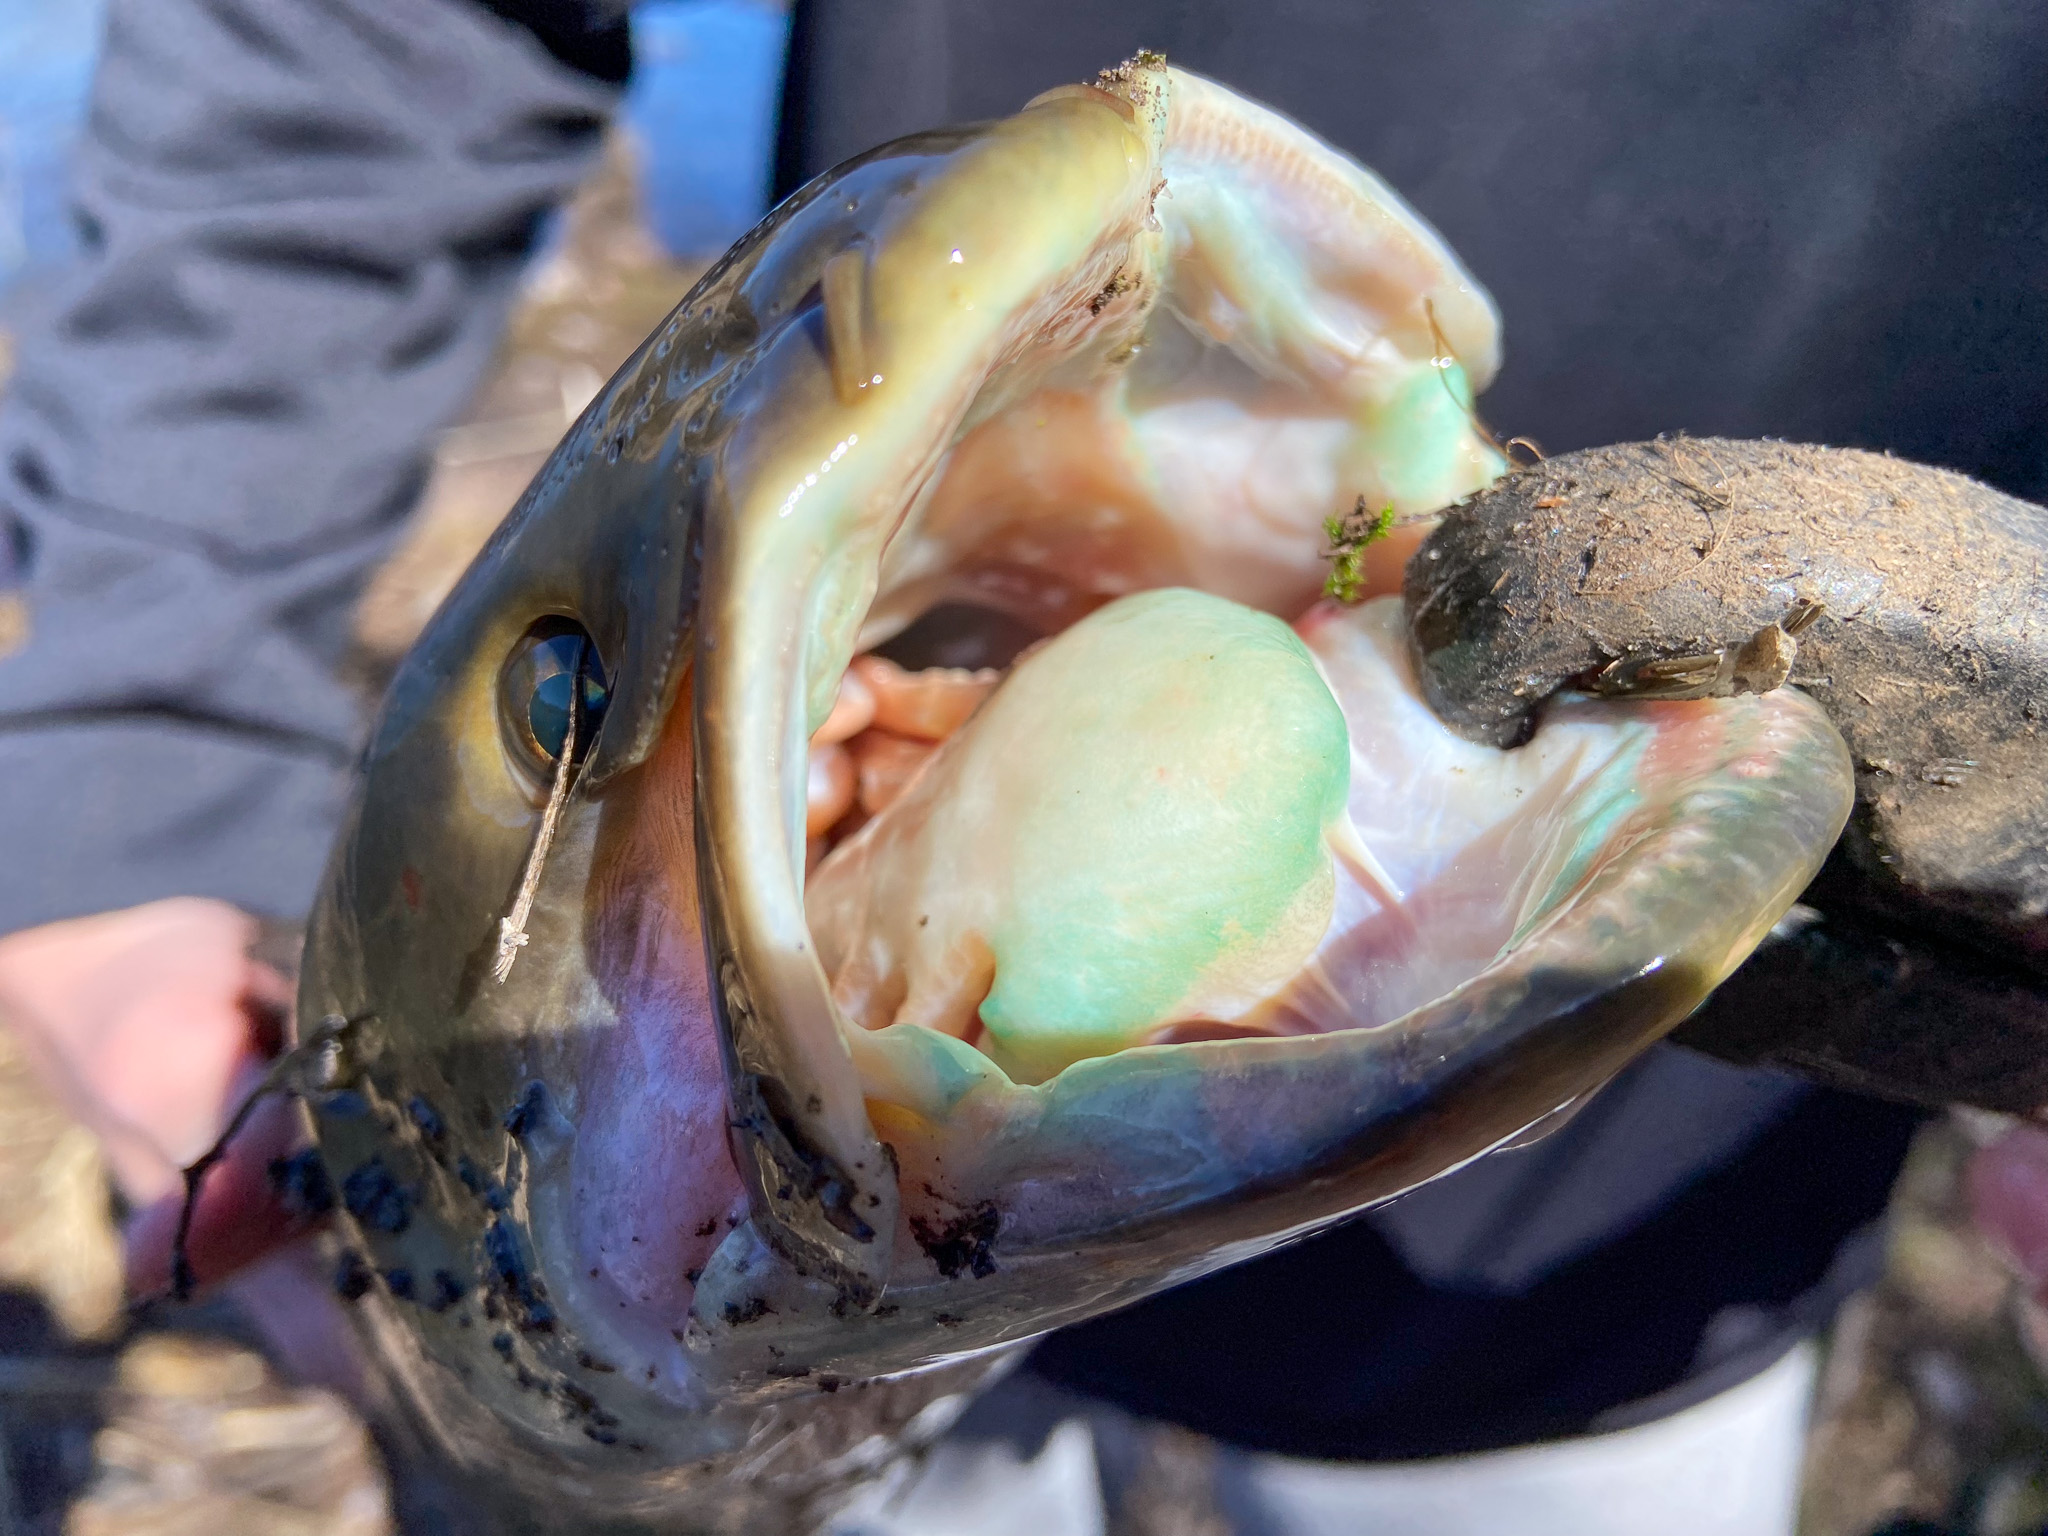 A bowfin with a hard mouth and greenish tongue.